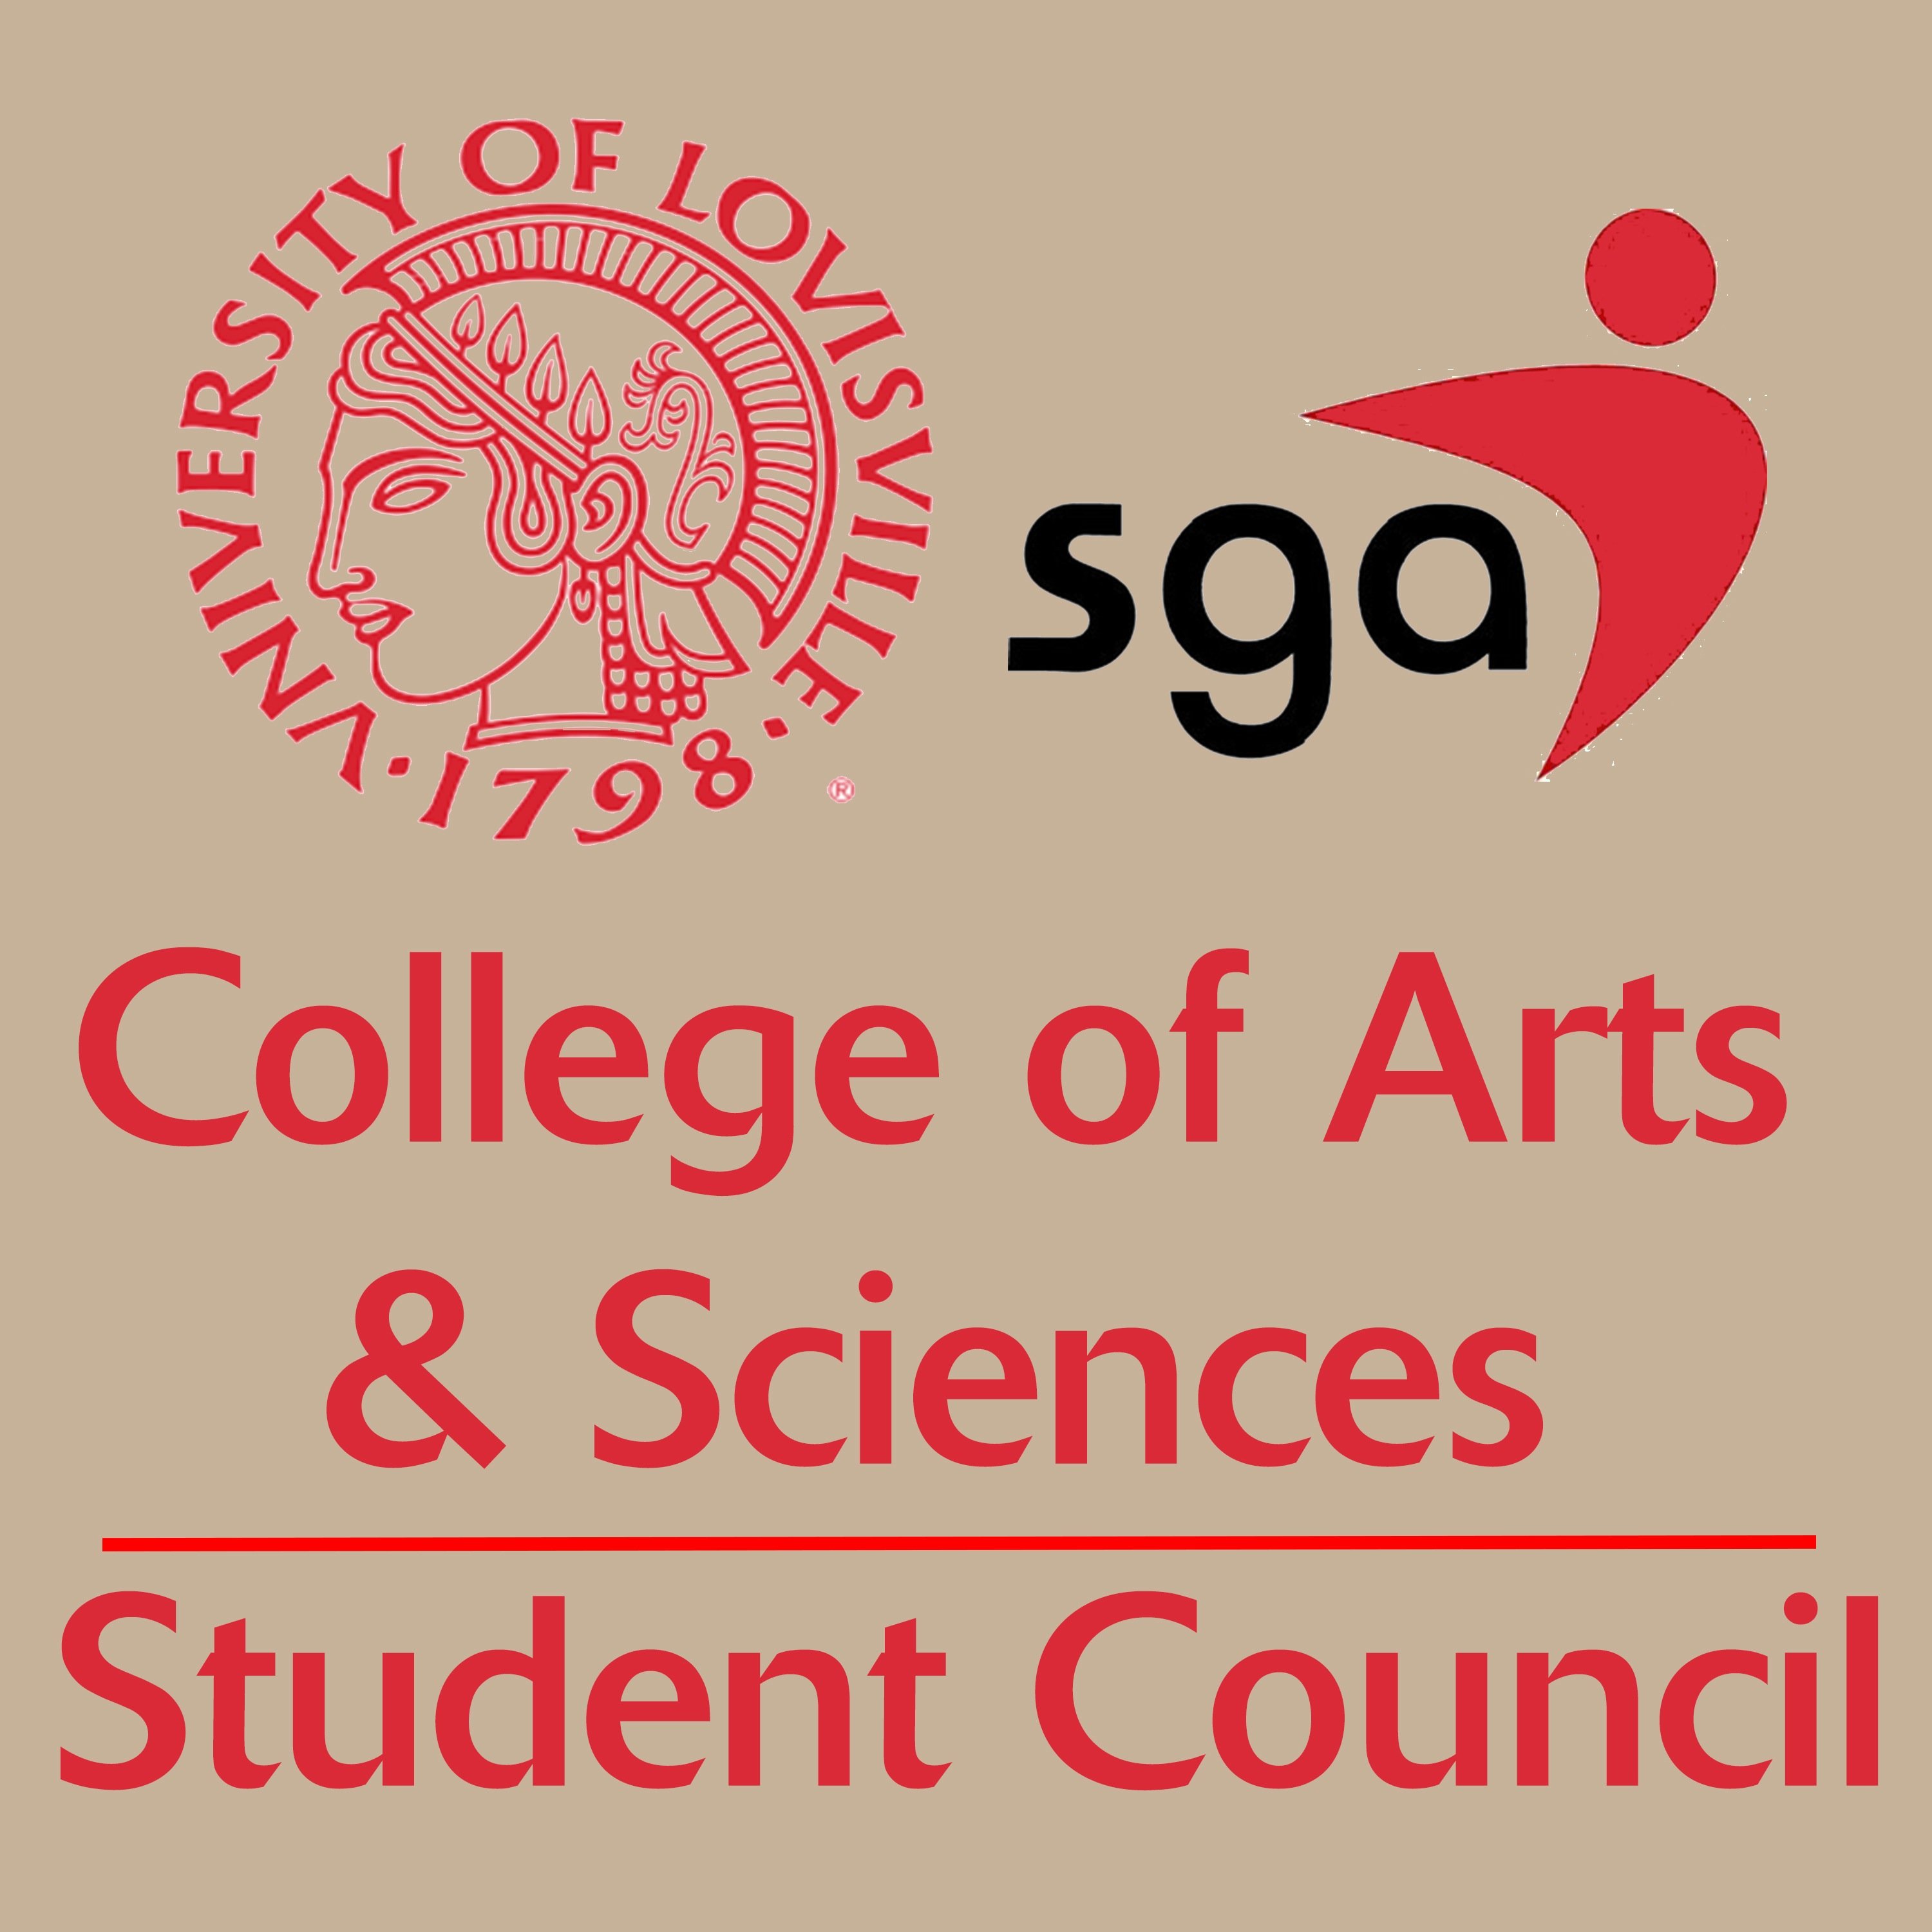 Student Council for the College of Arts & Sciences | University of Louisville, est. 1798